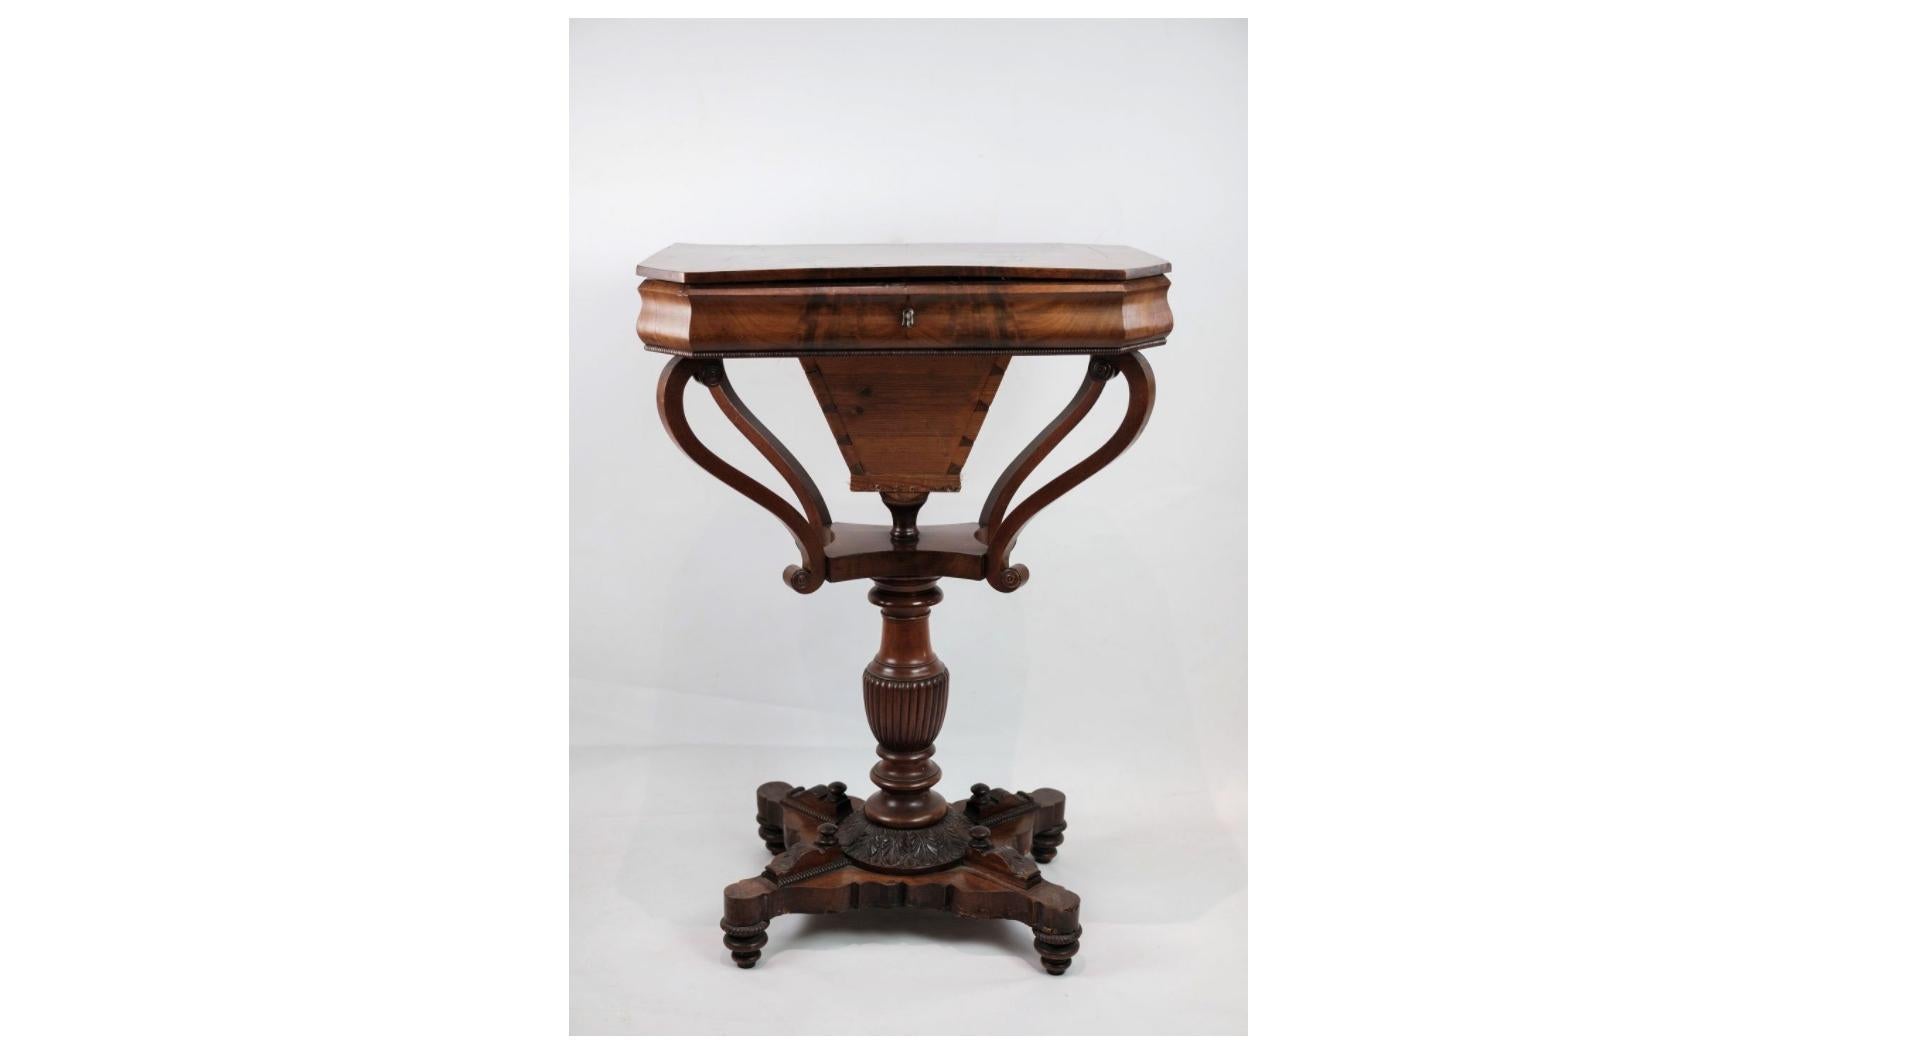 The antique mahogany sewing table on a pillar from around the 1840s is a captivating piece of furniture that exudes charm and history. Crafted from rich mahogany wood, known for its durability and luxurious appearance, this sewing table showcases